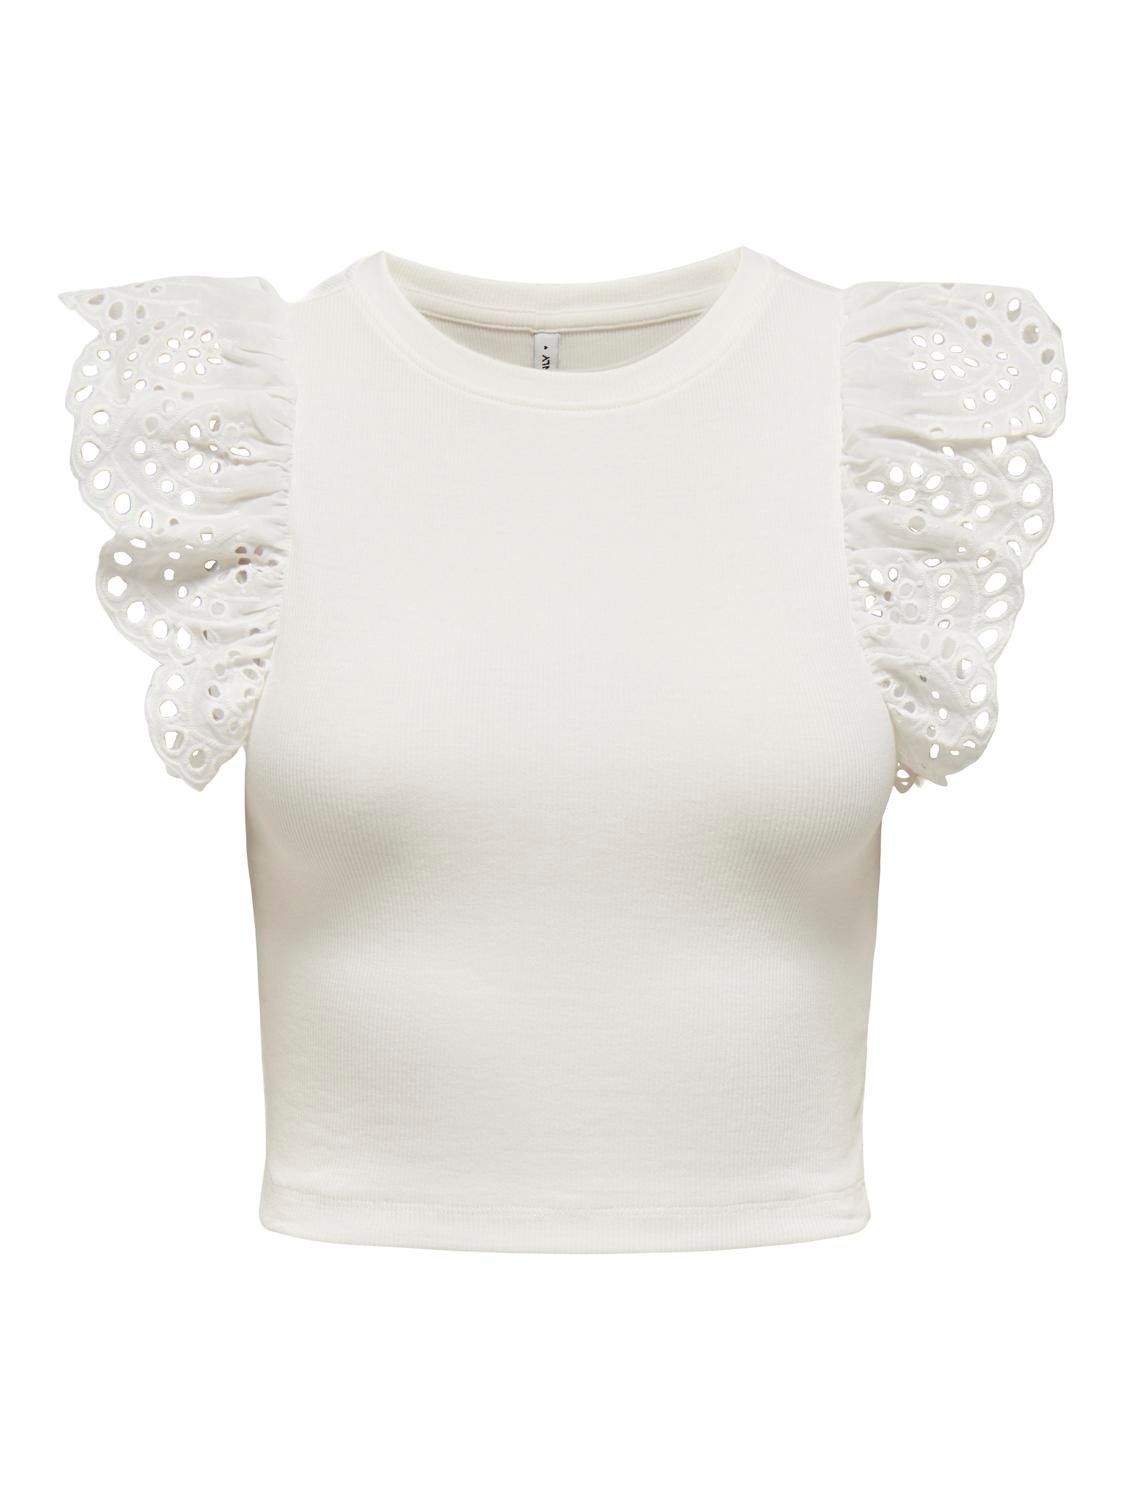 ONLY O-neck top with lace details -Cloud Dancer - 15324934